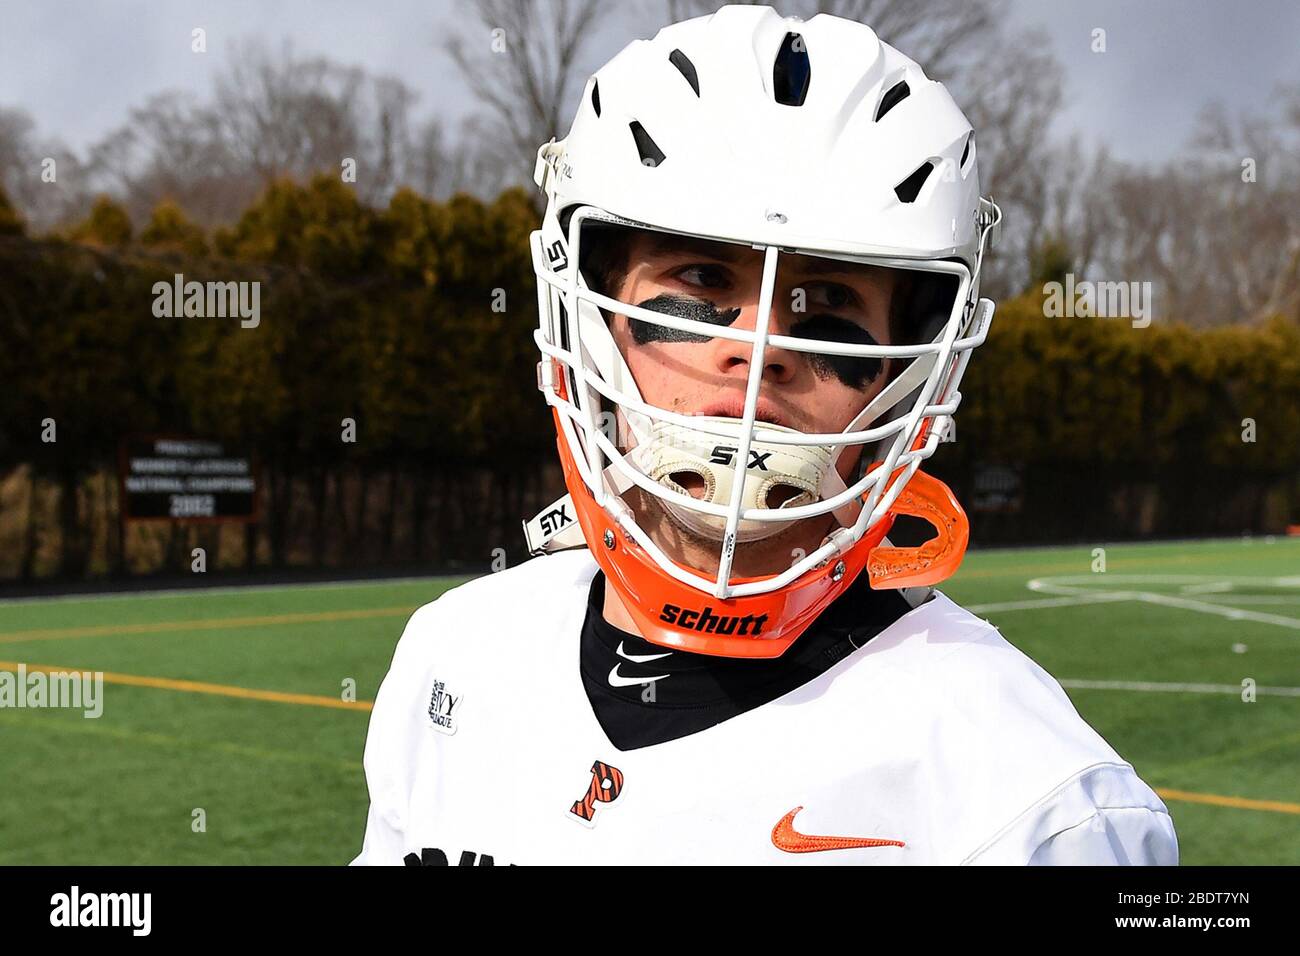 Princeton, New Jersey, USA. 29th Feb, 2020. Princeton Tigers attackman Michael Sowers #22 following an NCAA MenÕs lacrosse game against the Johns Hopkins Blue Jays at Class of 1952 Stadium on February, 29, 2020 in Princeton, New Jersey. Princeton defeated Johns Hopkins 18-11. Rich Barnes/CSM/Alamy Live News Stock Photo